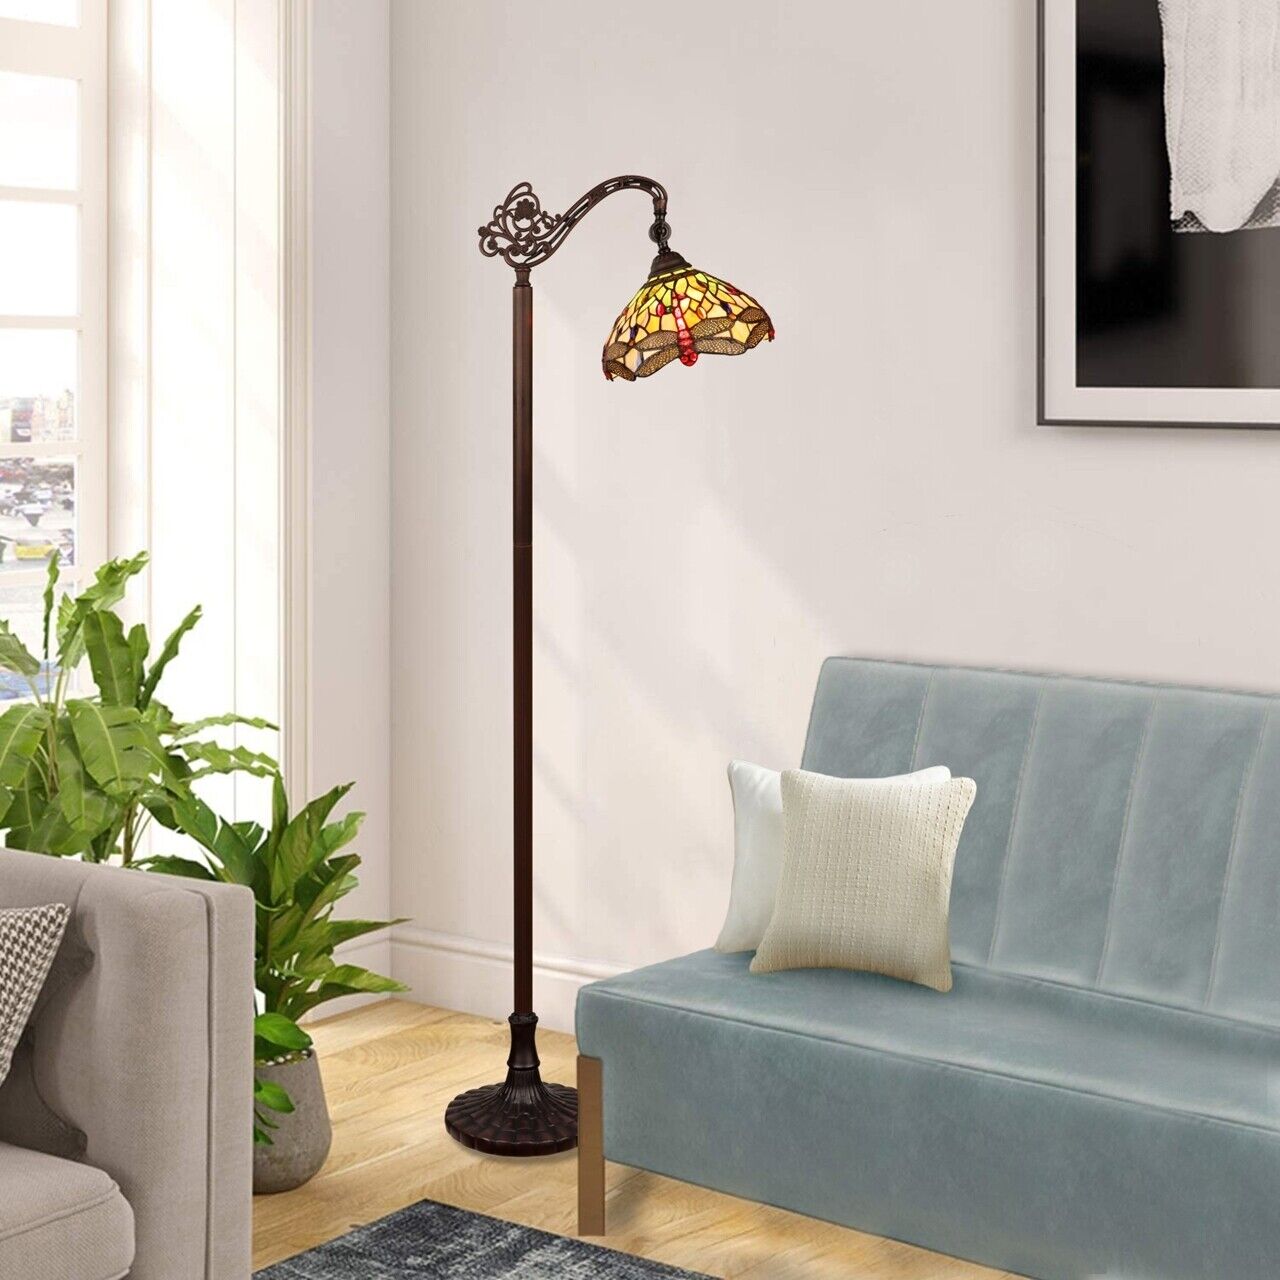 63.2" Antique Vintage Style Stained Glass Dragonfly Reading Floor Lamp